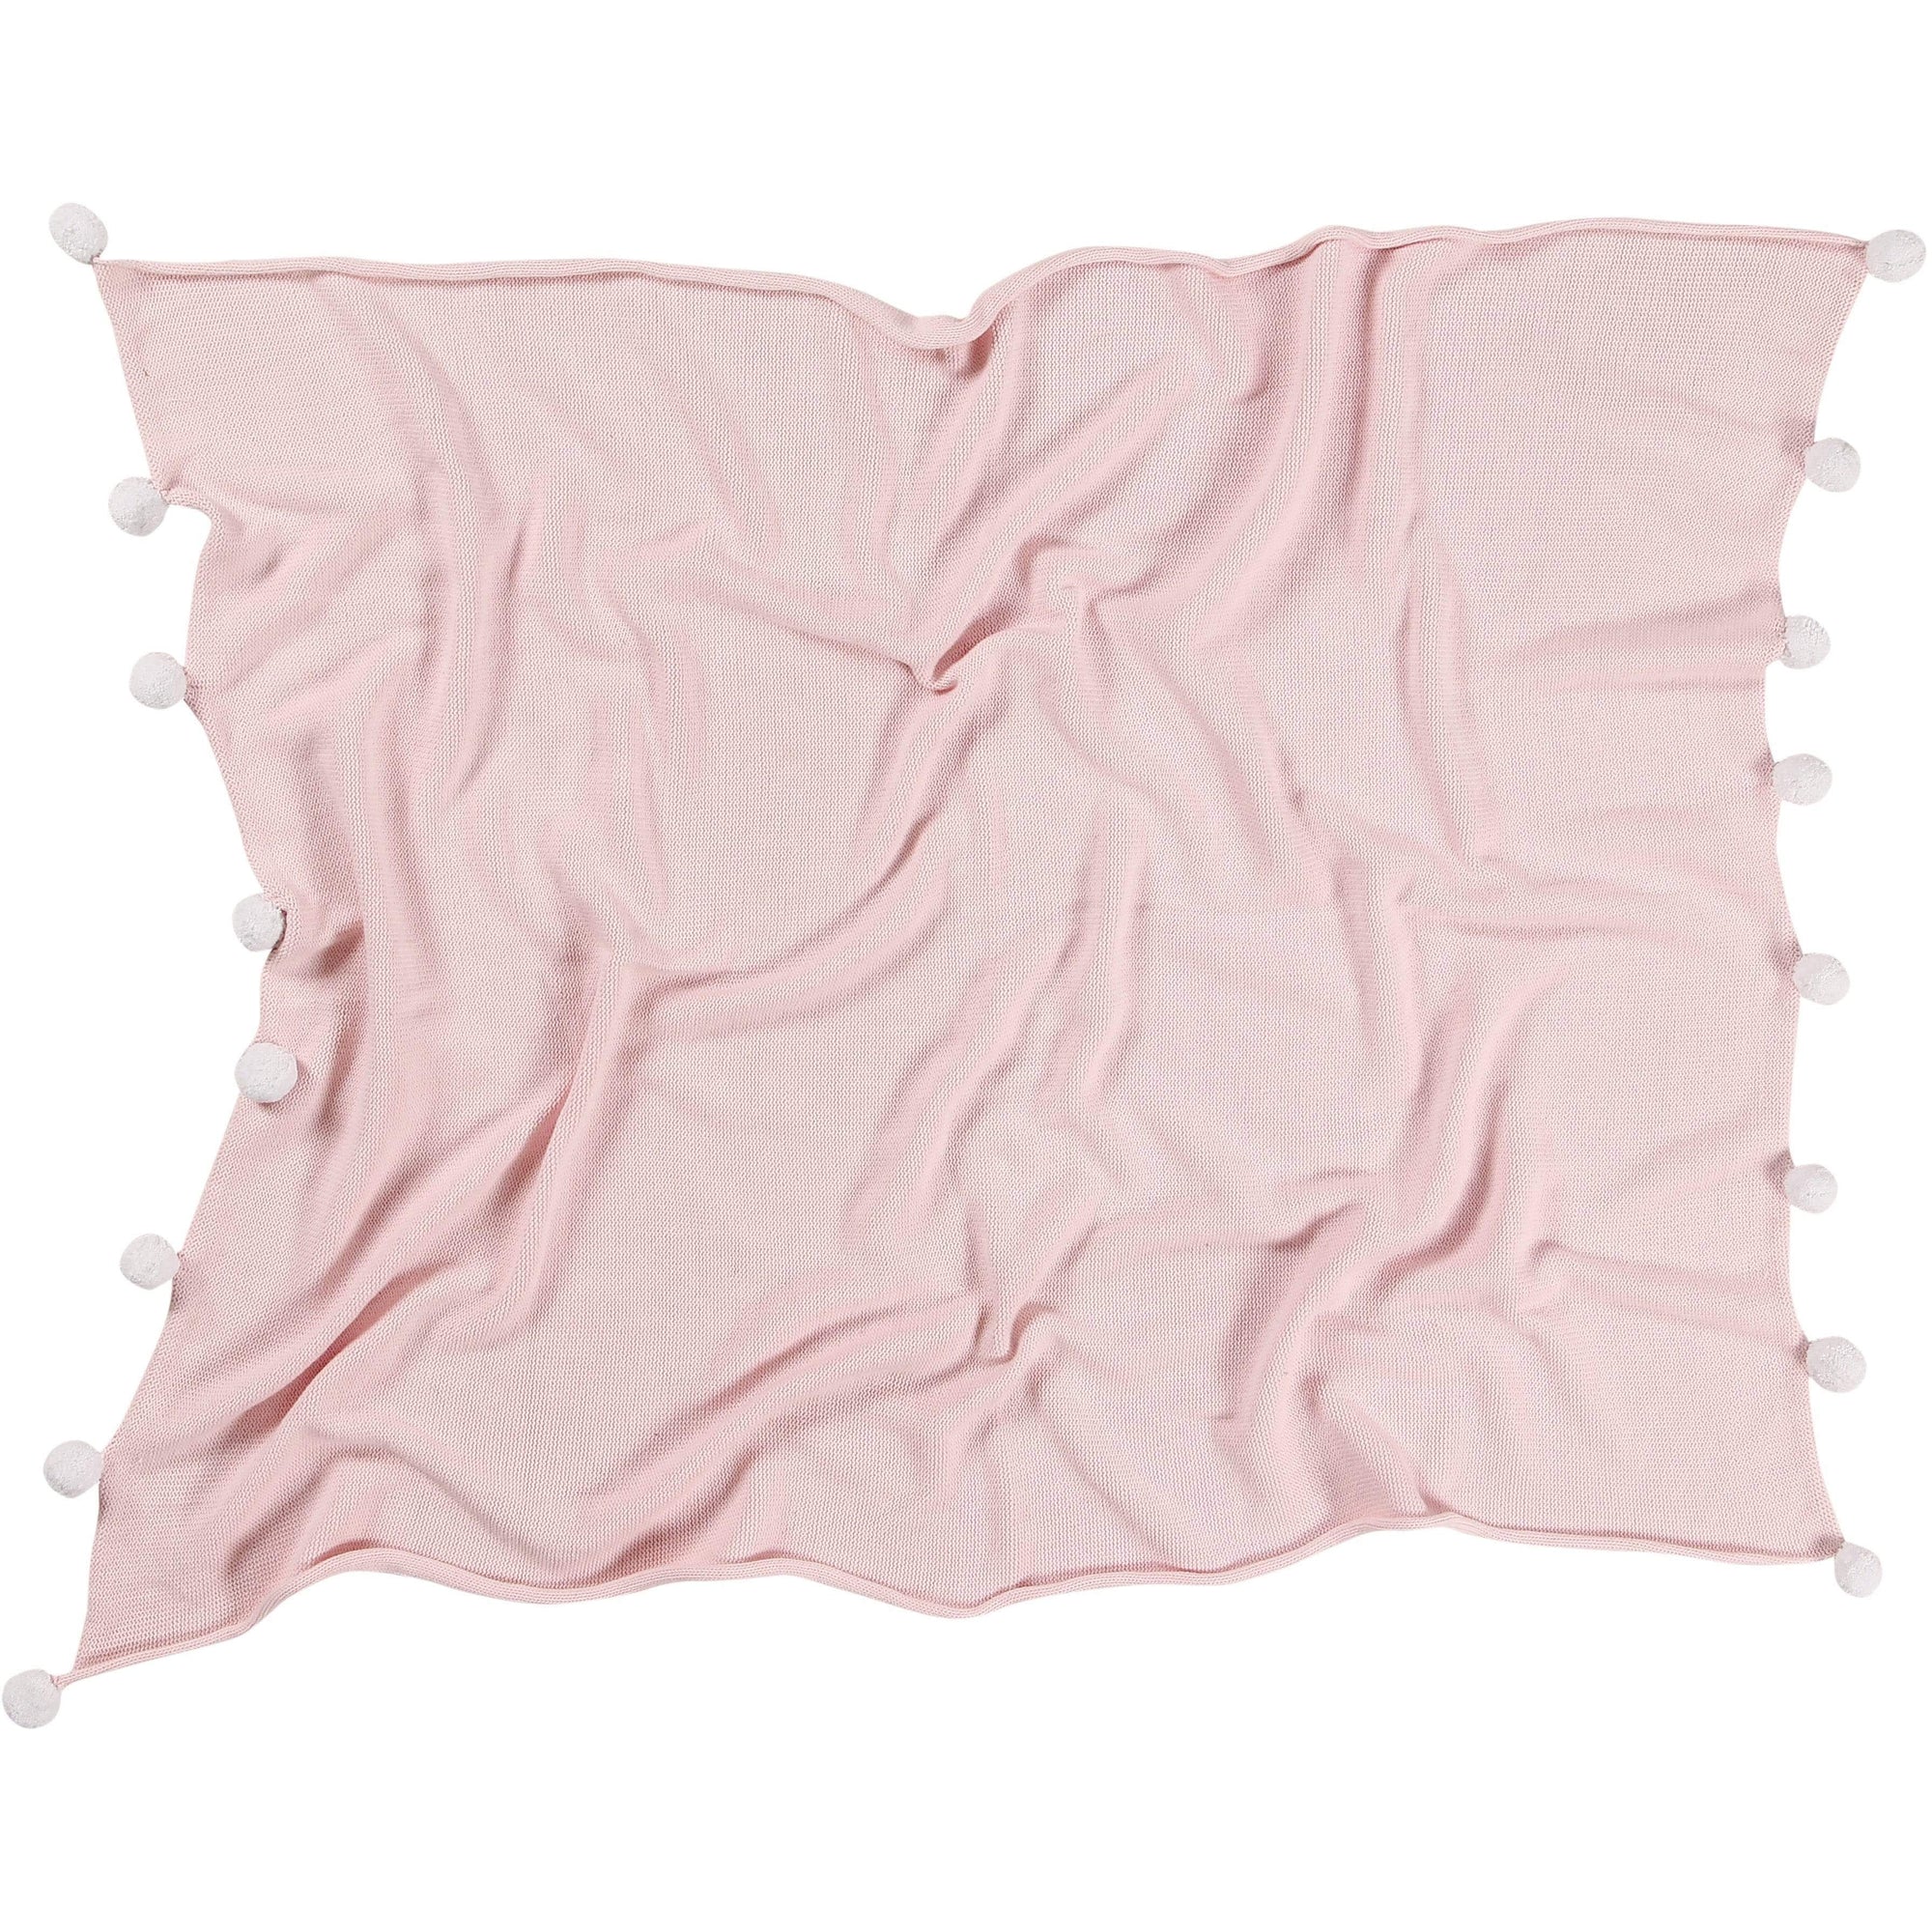 Lorena Canals Bubbly Soft Pink Baby Blanket